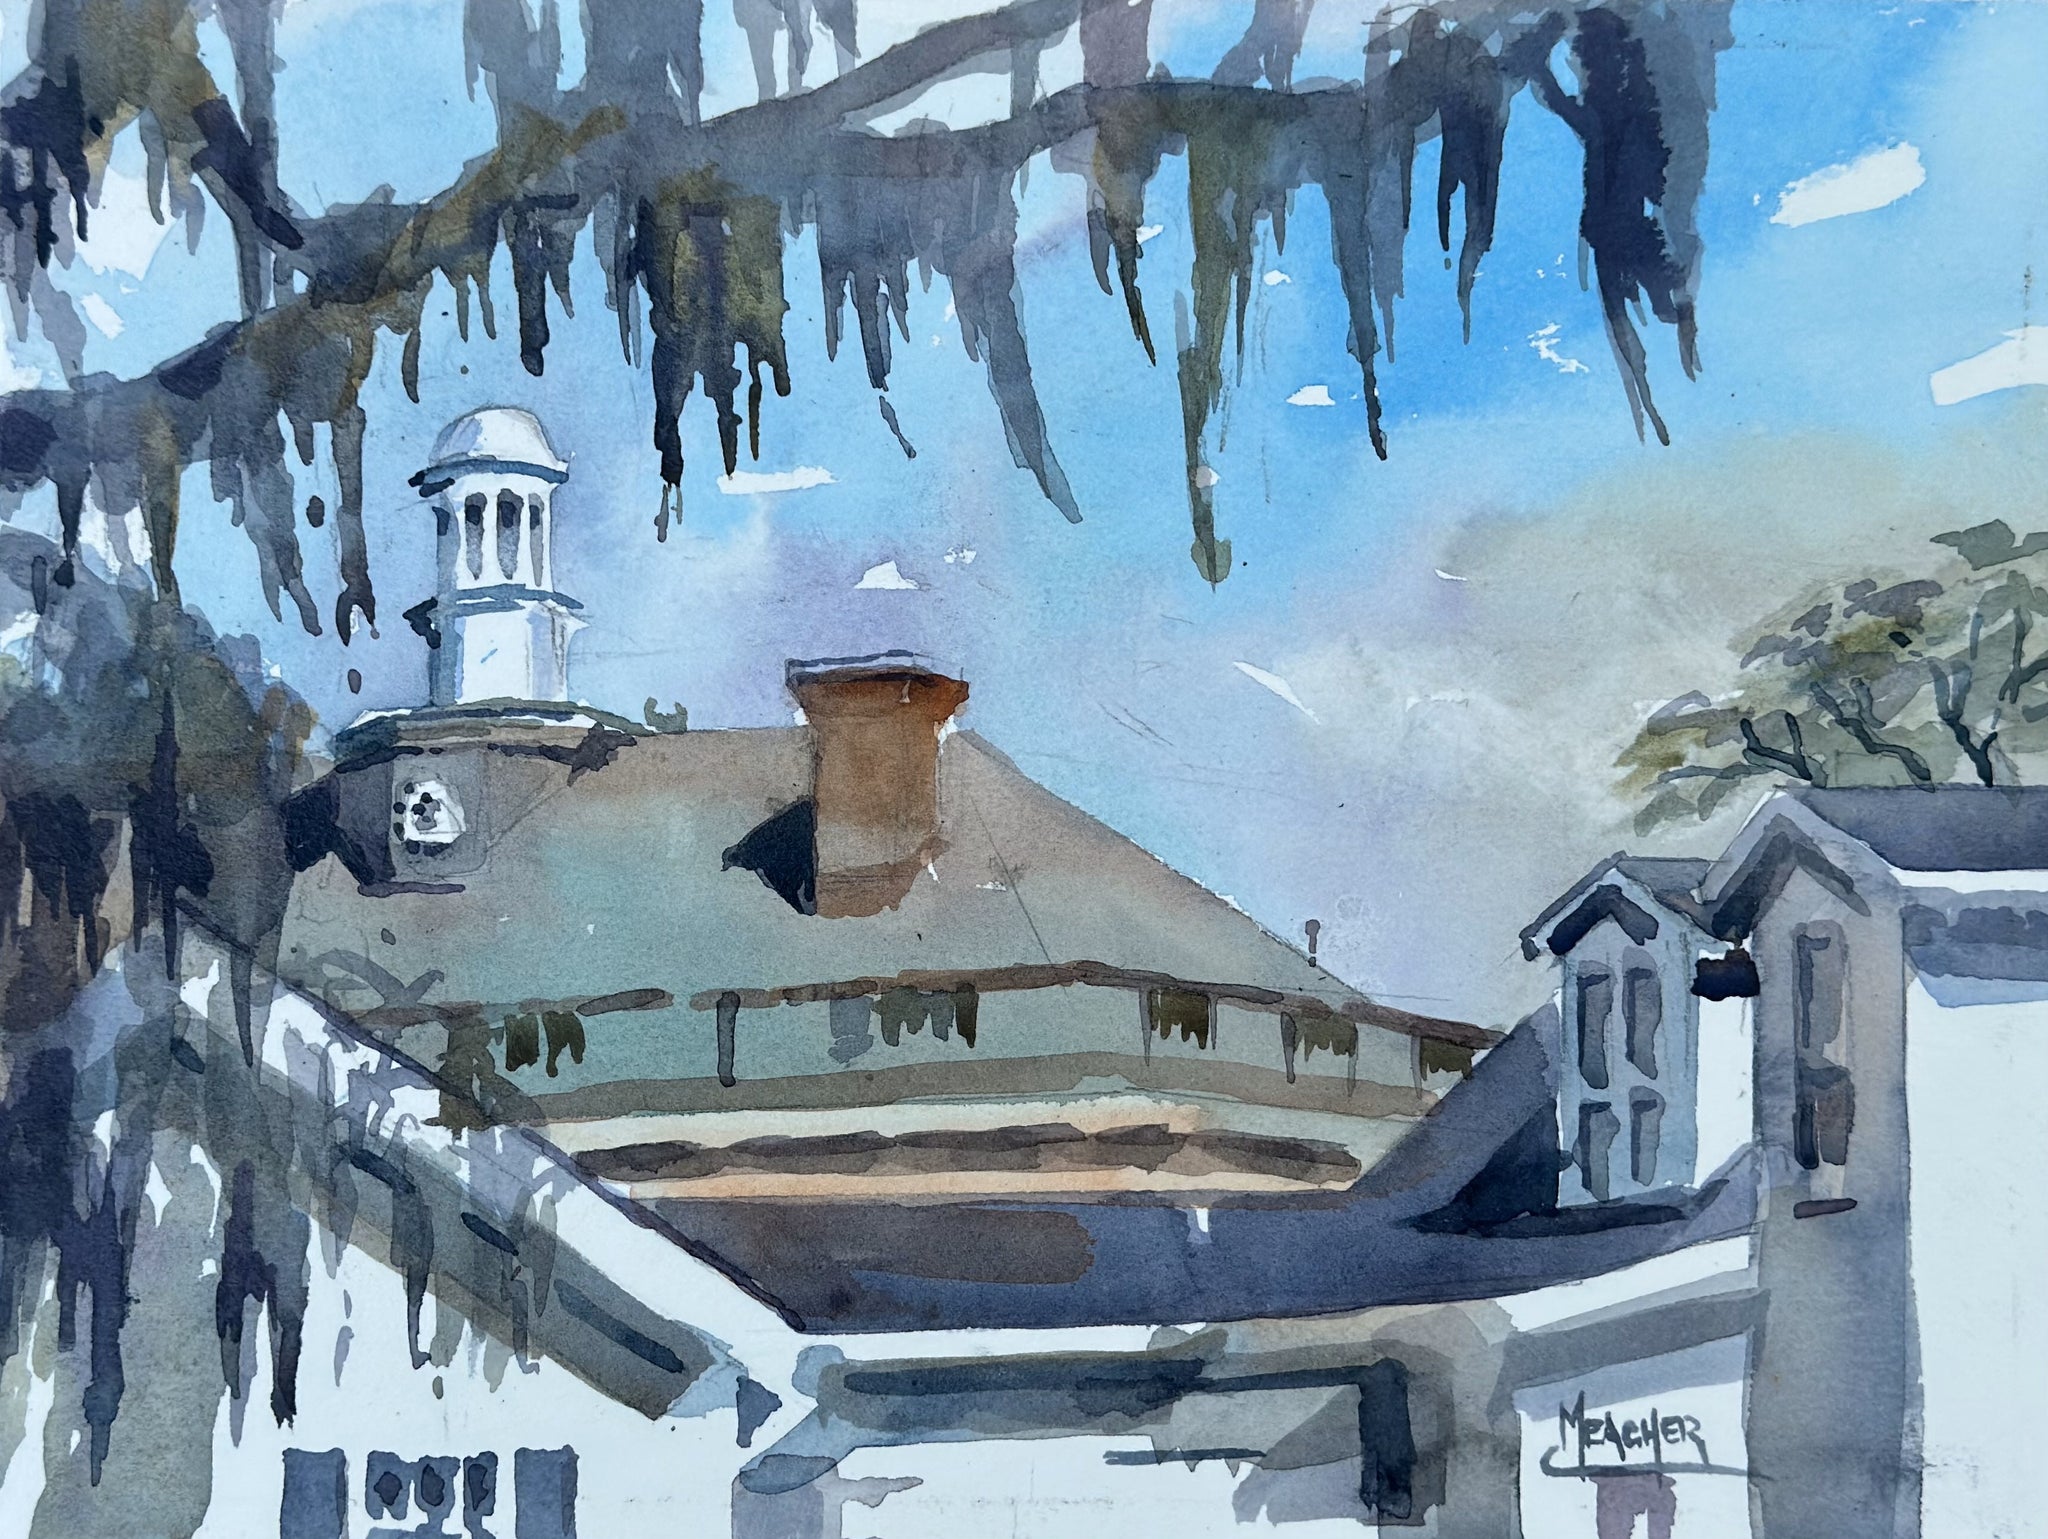 ROOFTOPS AND SPANISH MOSS